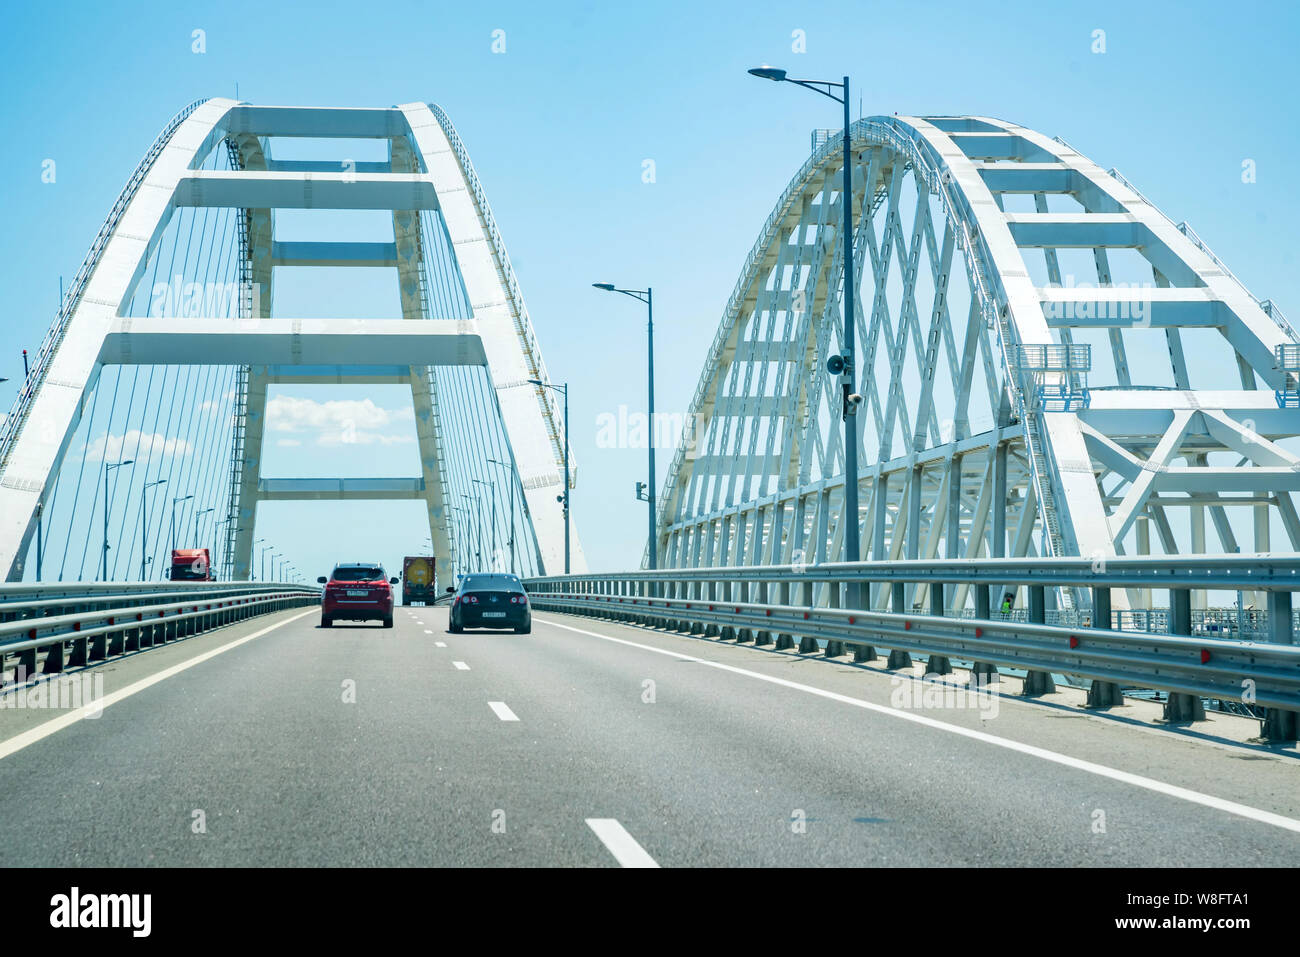 View of new Crimean bridge from the car Stock Photo